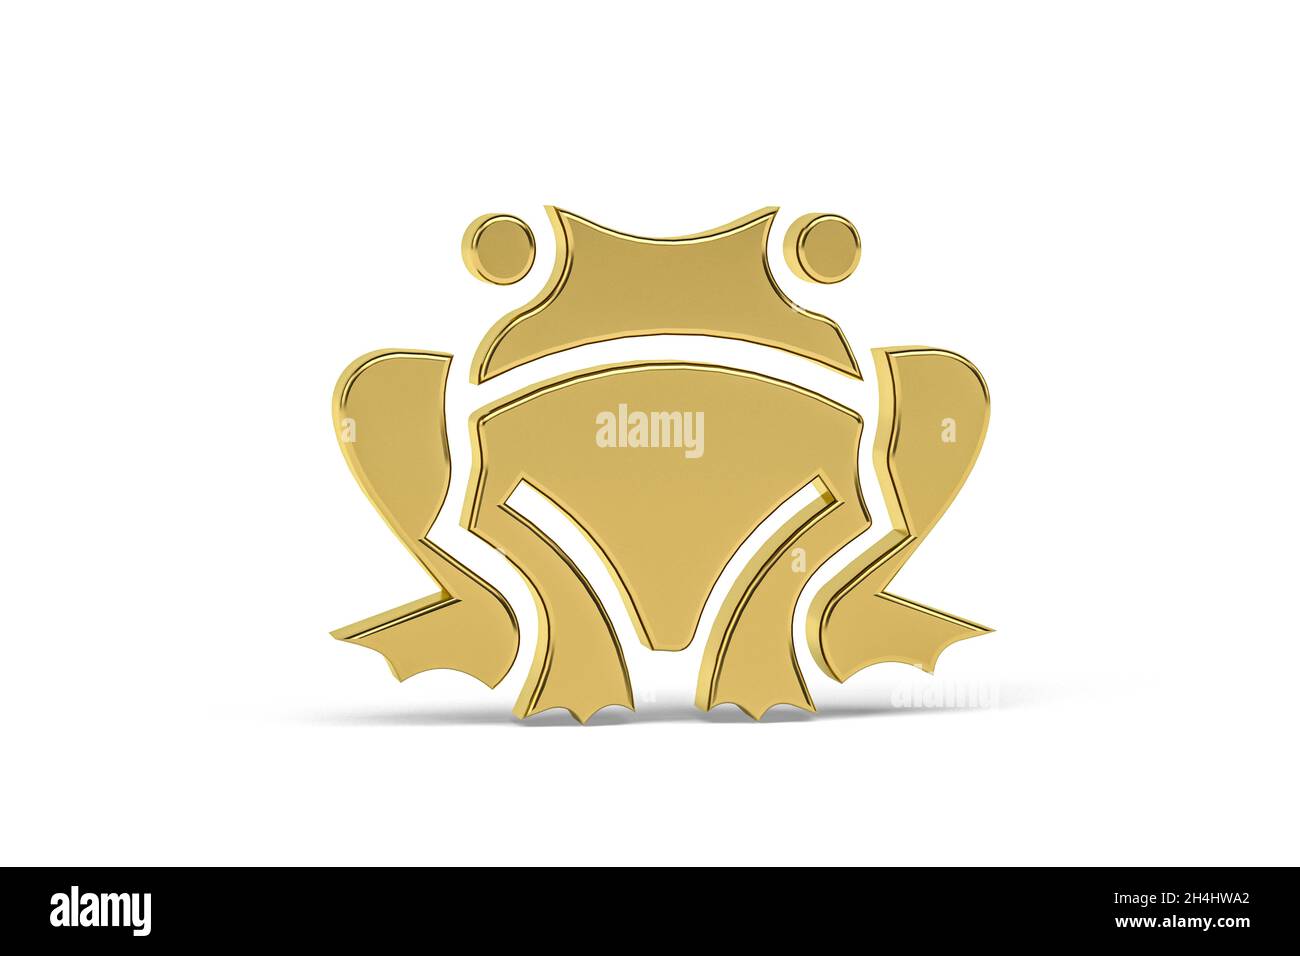 Golden 3d frog icon isolated on white background - 3d render Stock Photo